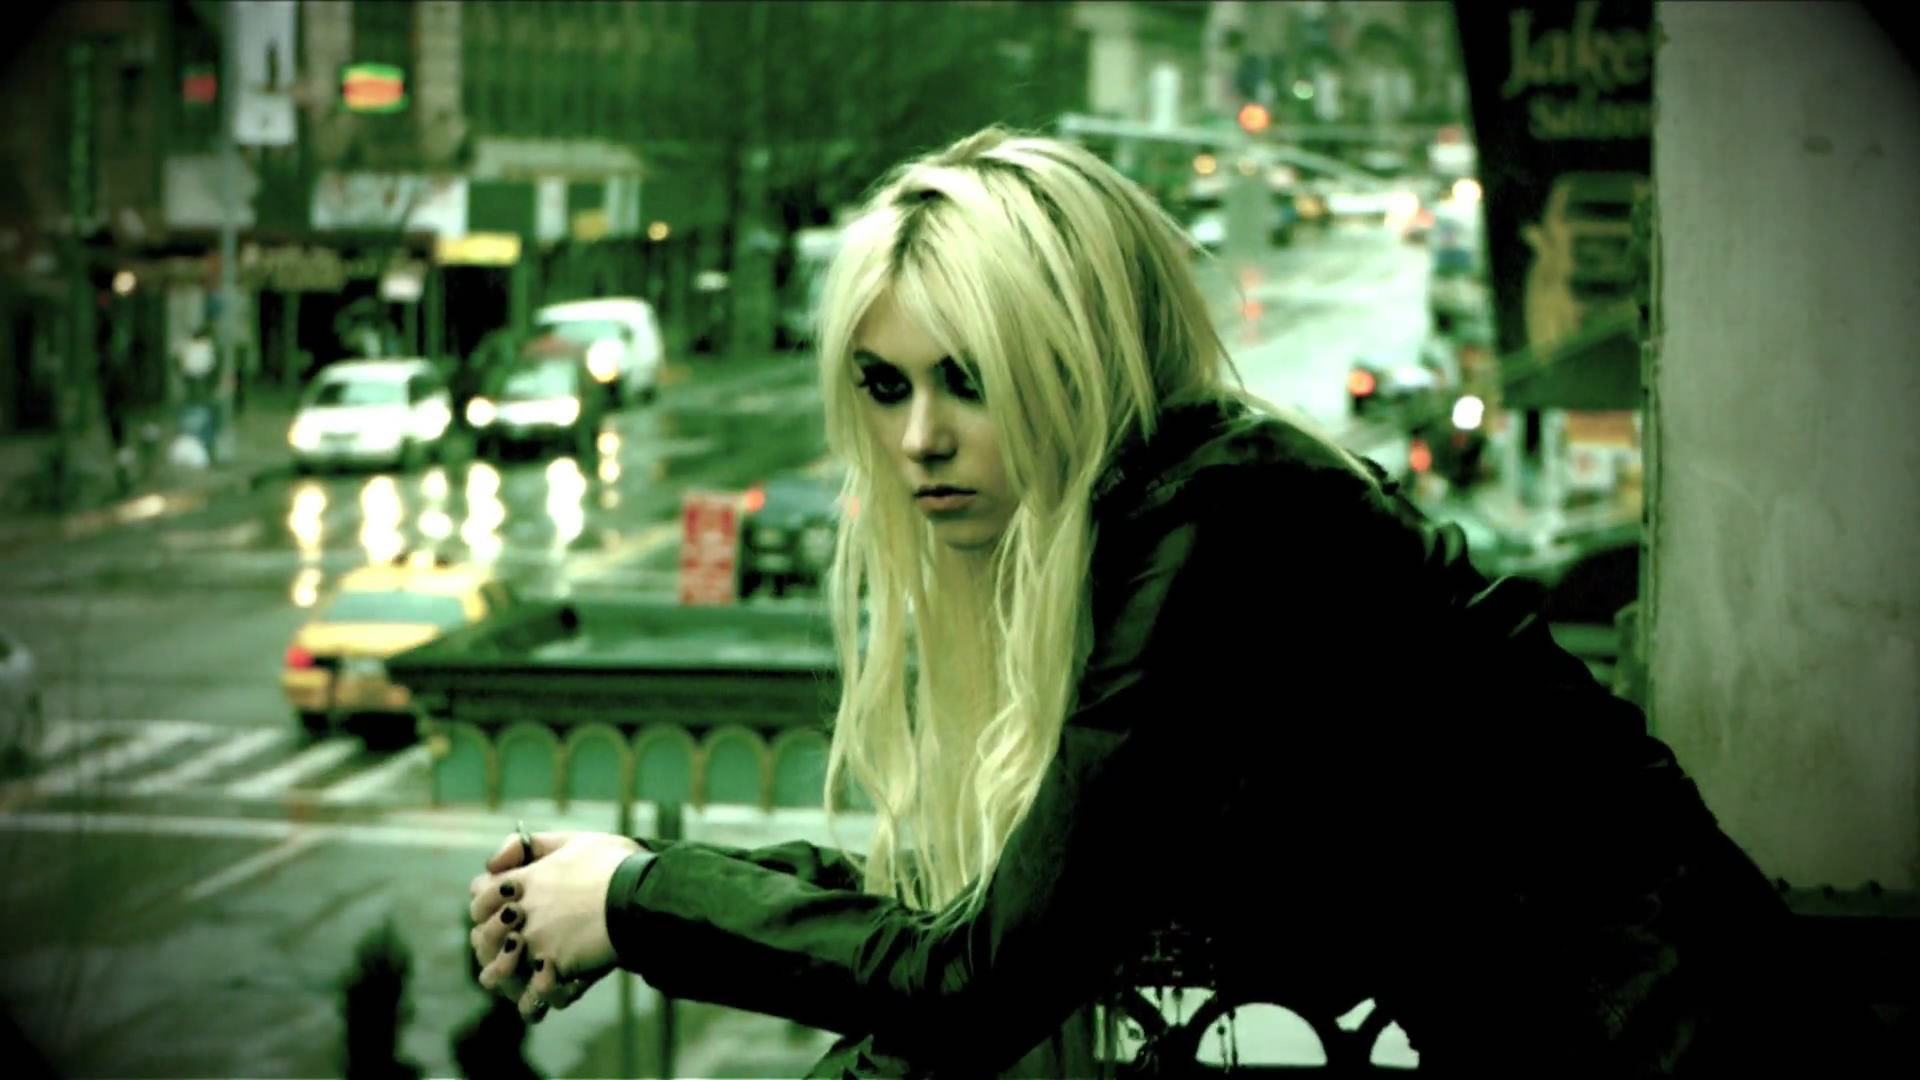 [Album Review] “Who You Selling For” by The Pretty Reckless The